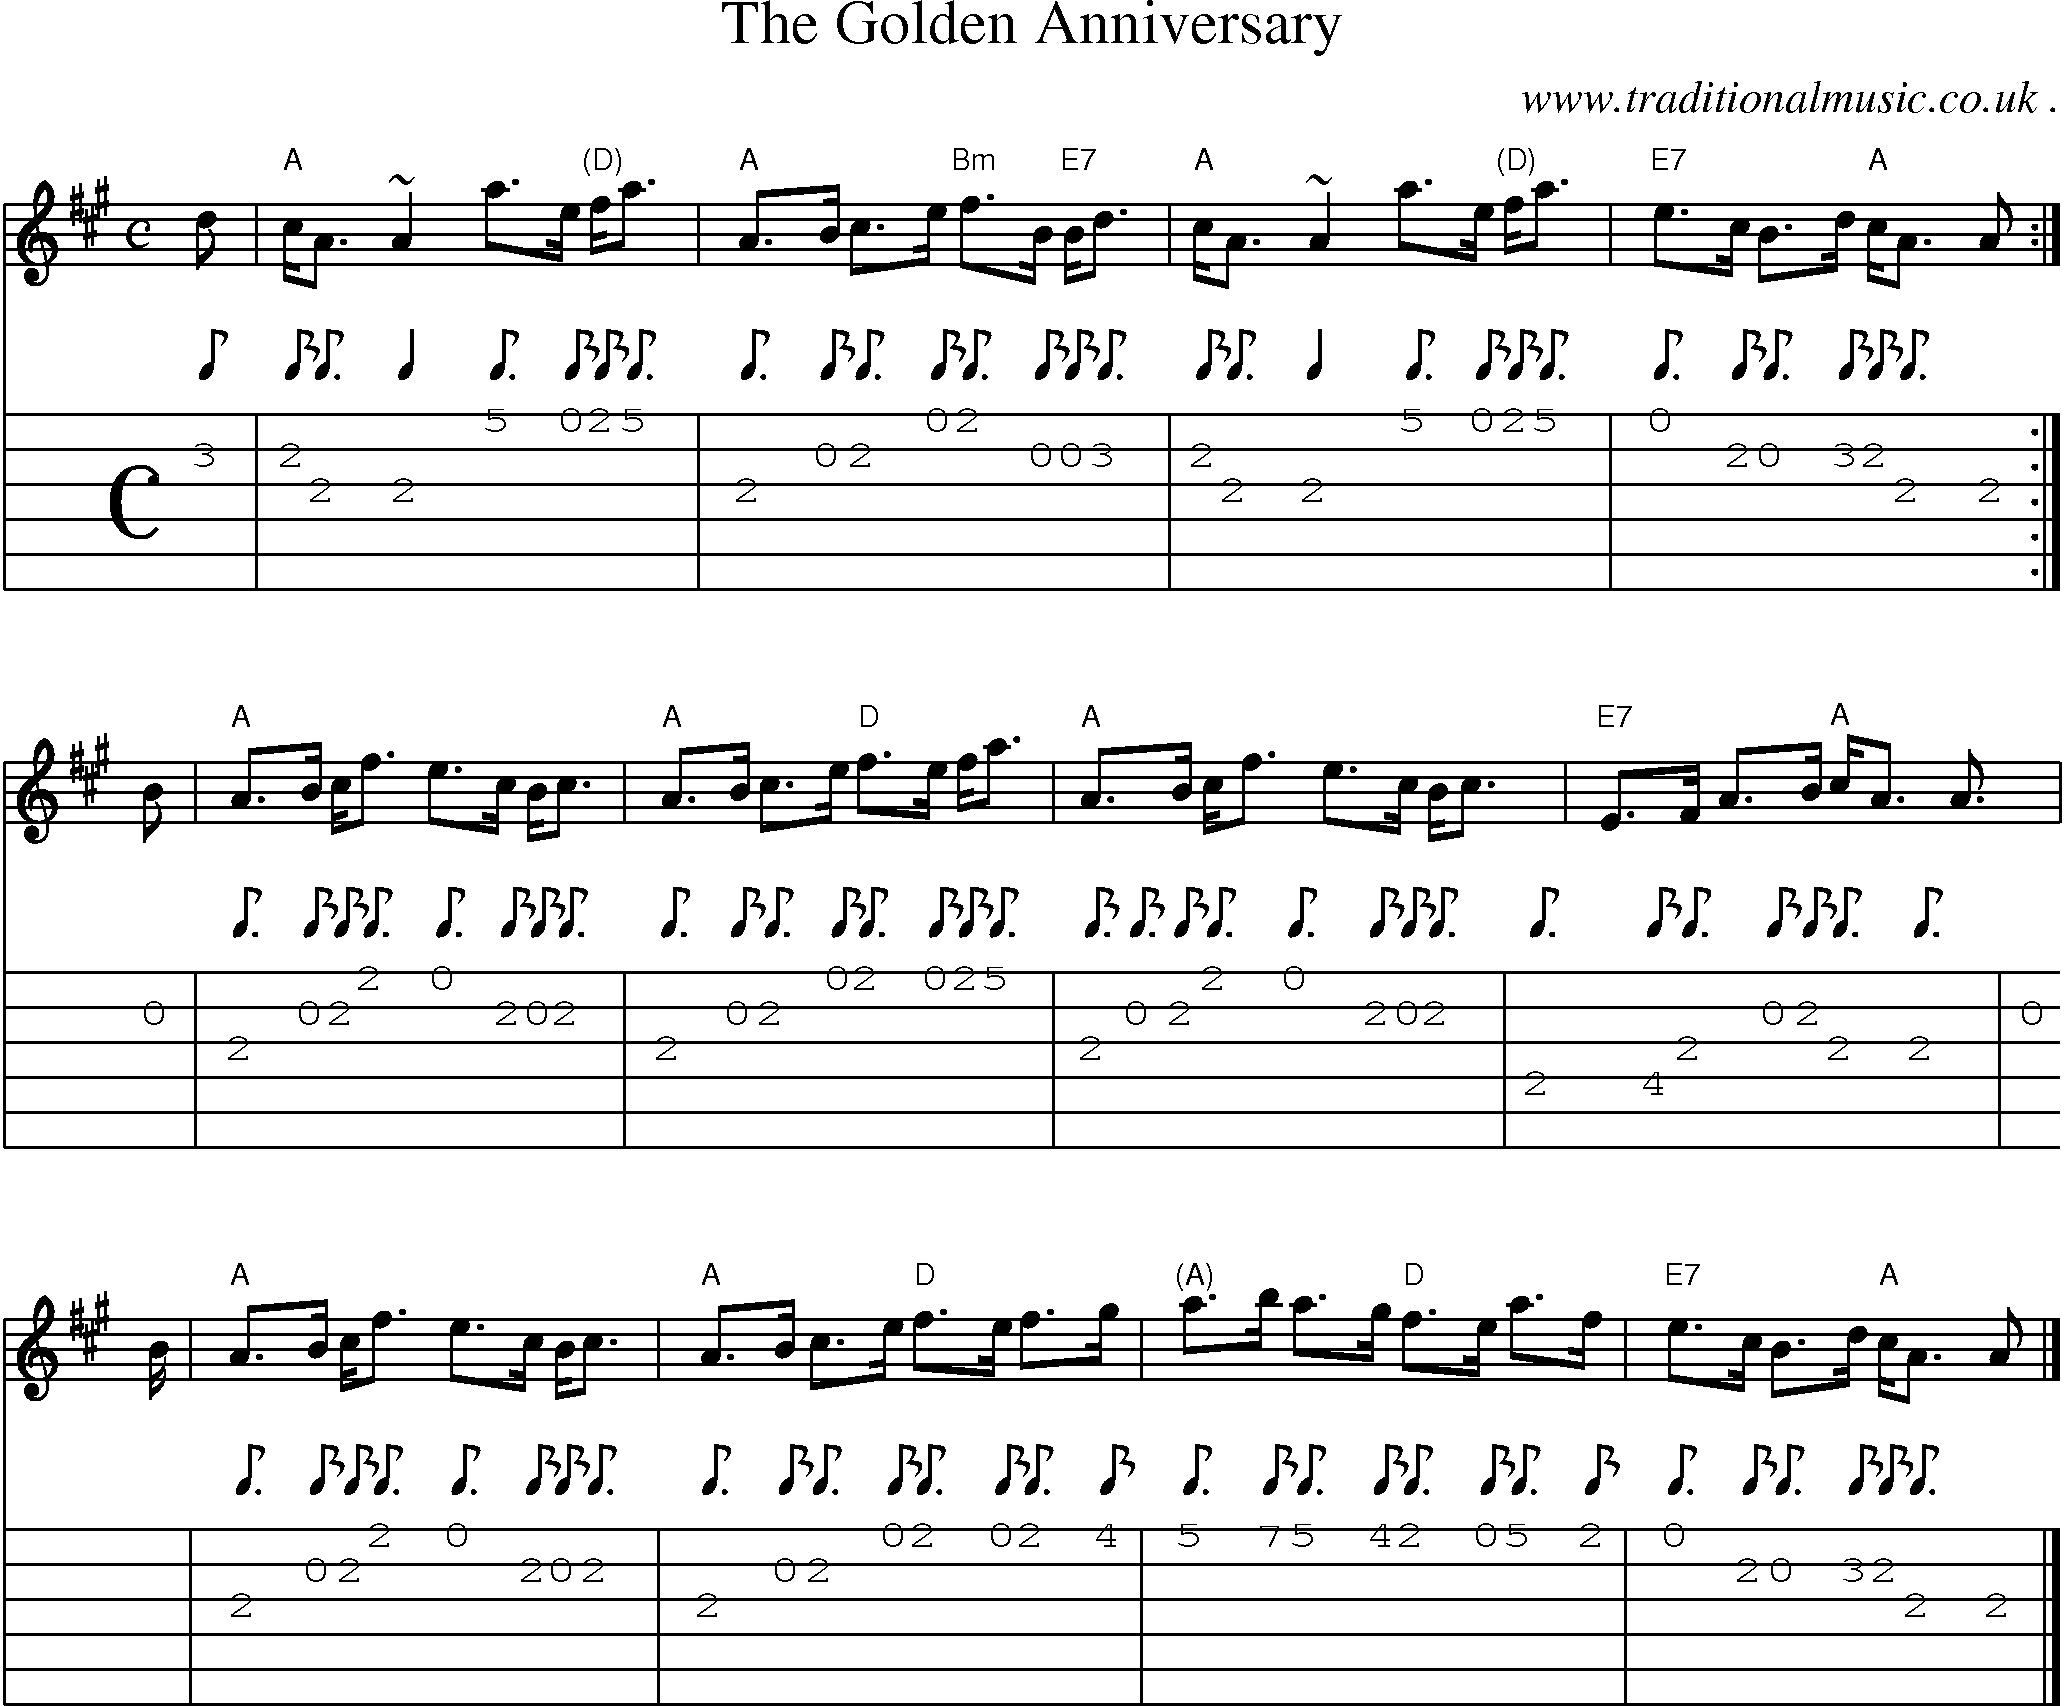 Sheet-music  score, Chords and Guitar Tabs for The Golden Anniversary